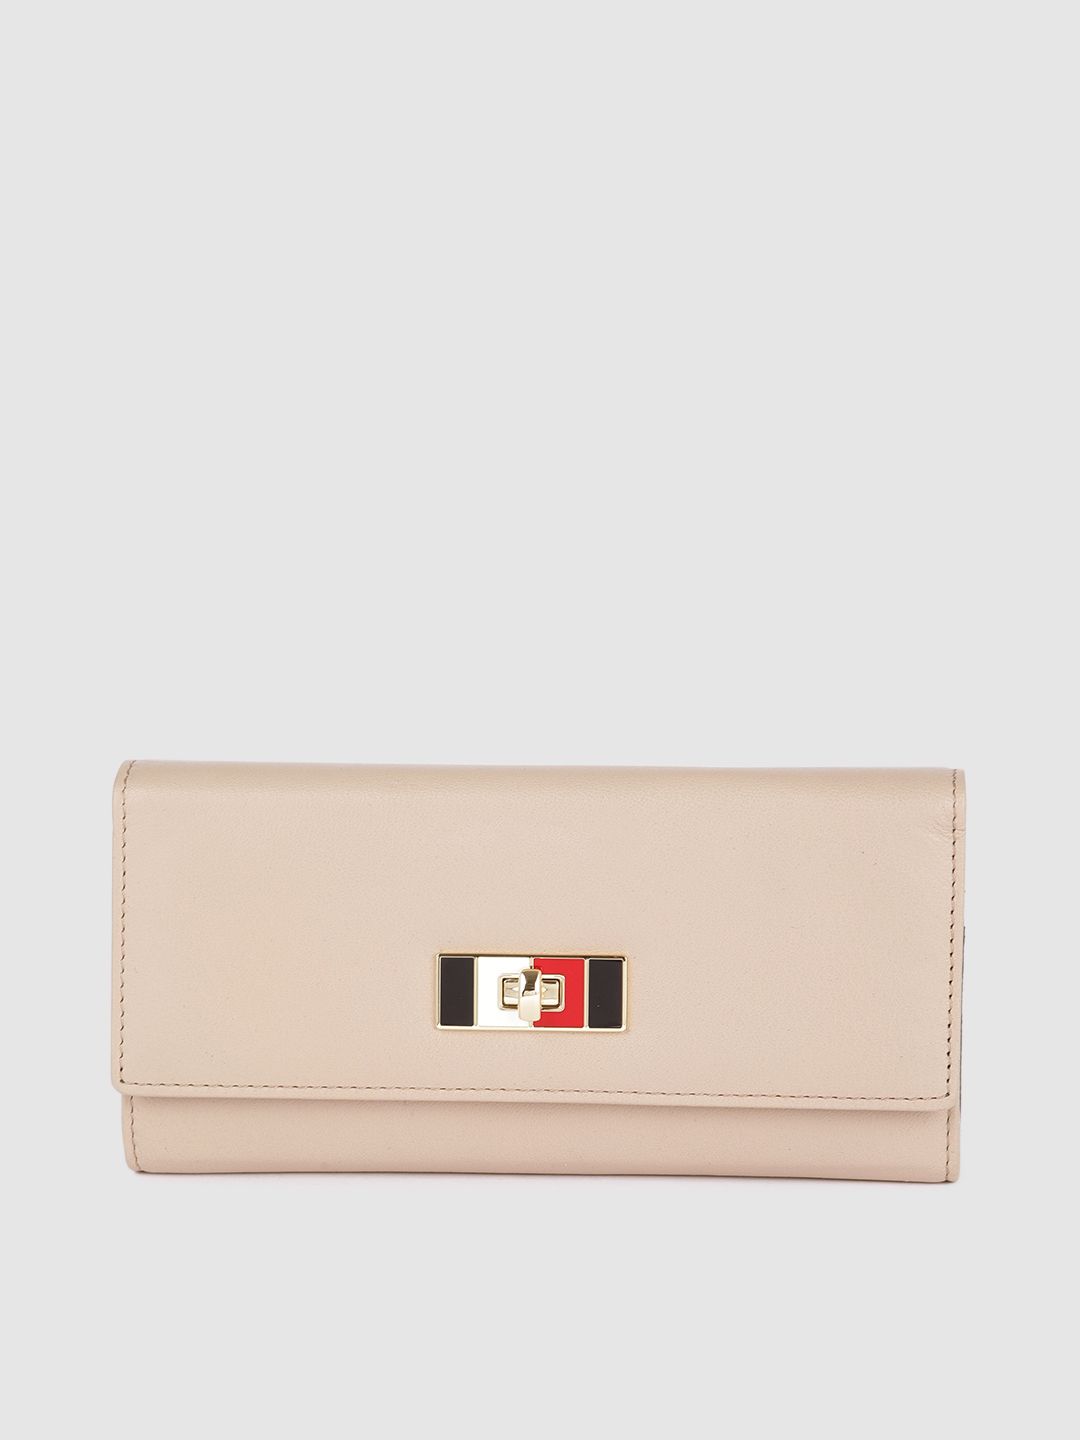 Tommy Hilfiger Women Beige Leather Three Fold Wallet Price in India